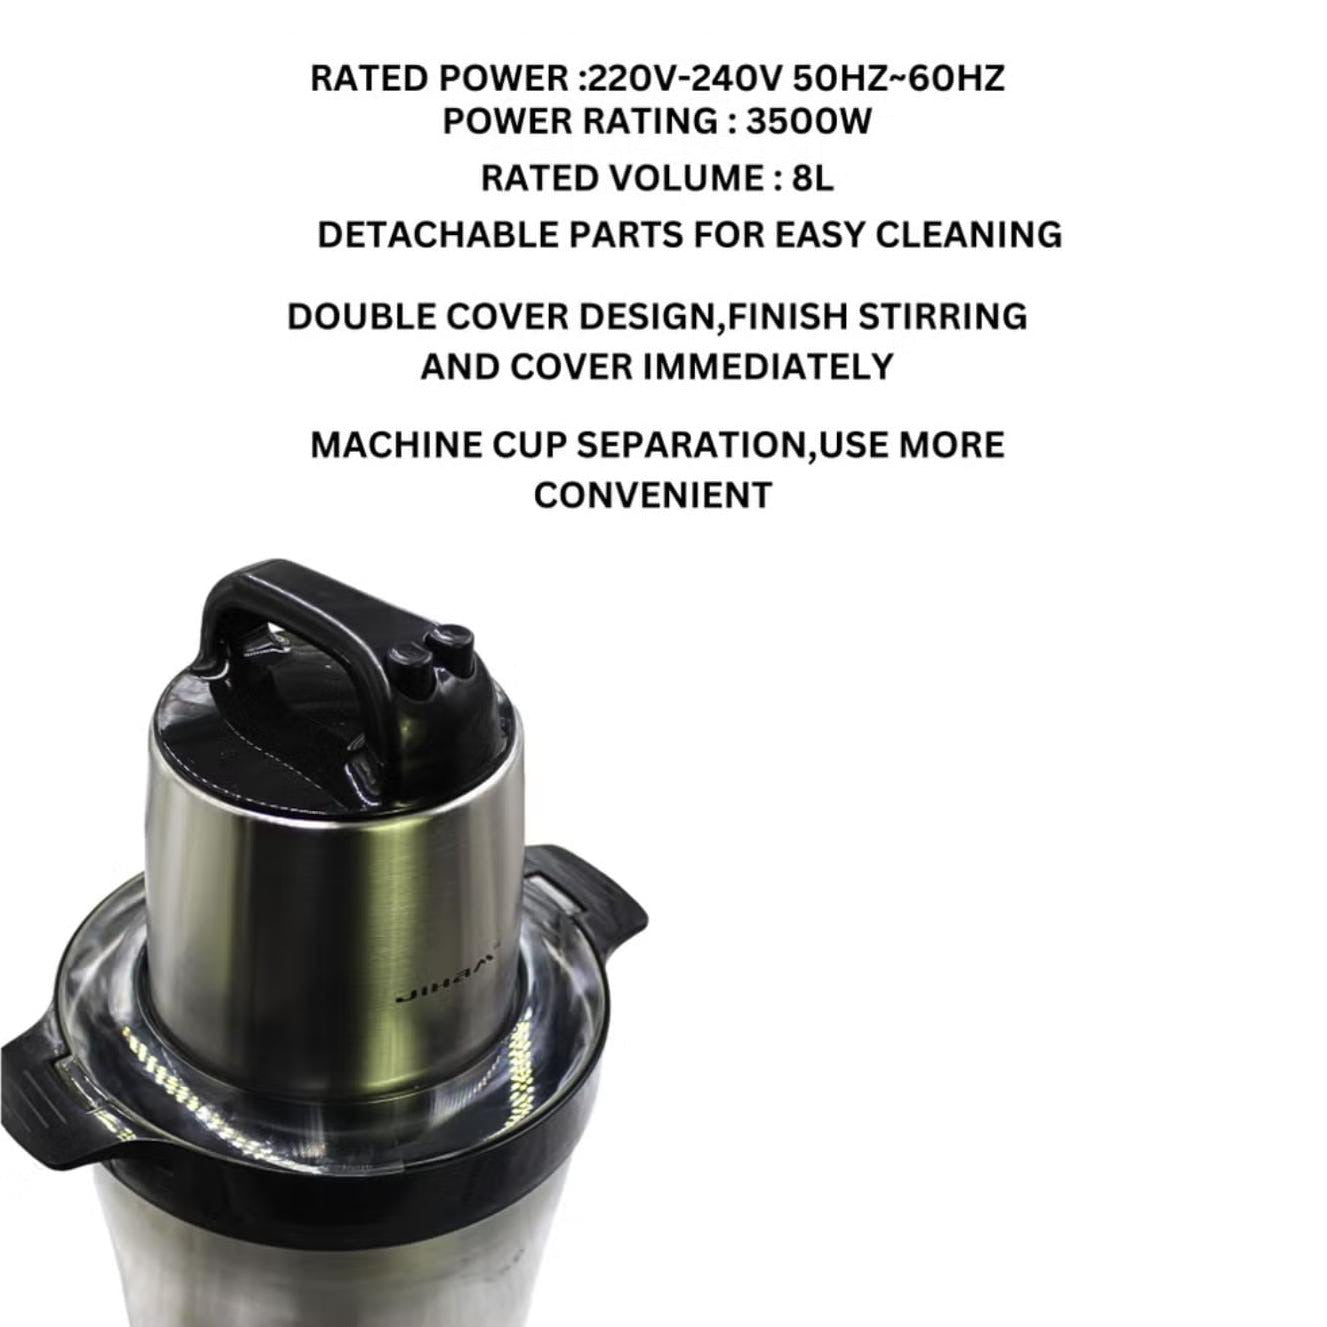 Specification Of JIHAM Stainless Steel Electric Chopper.